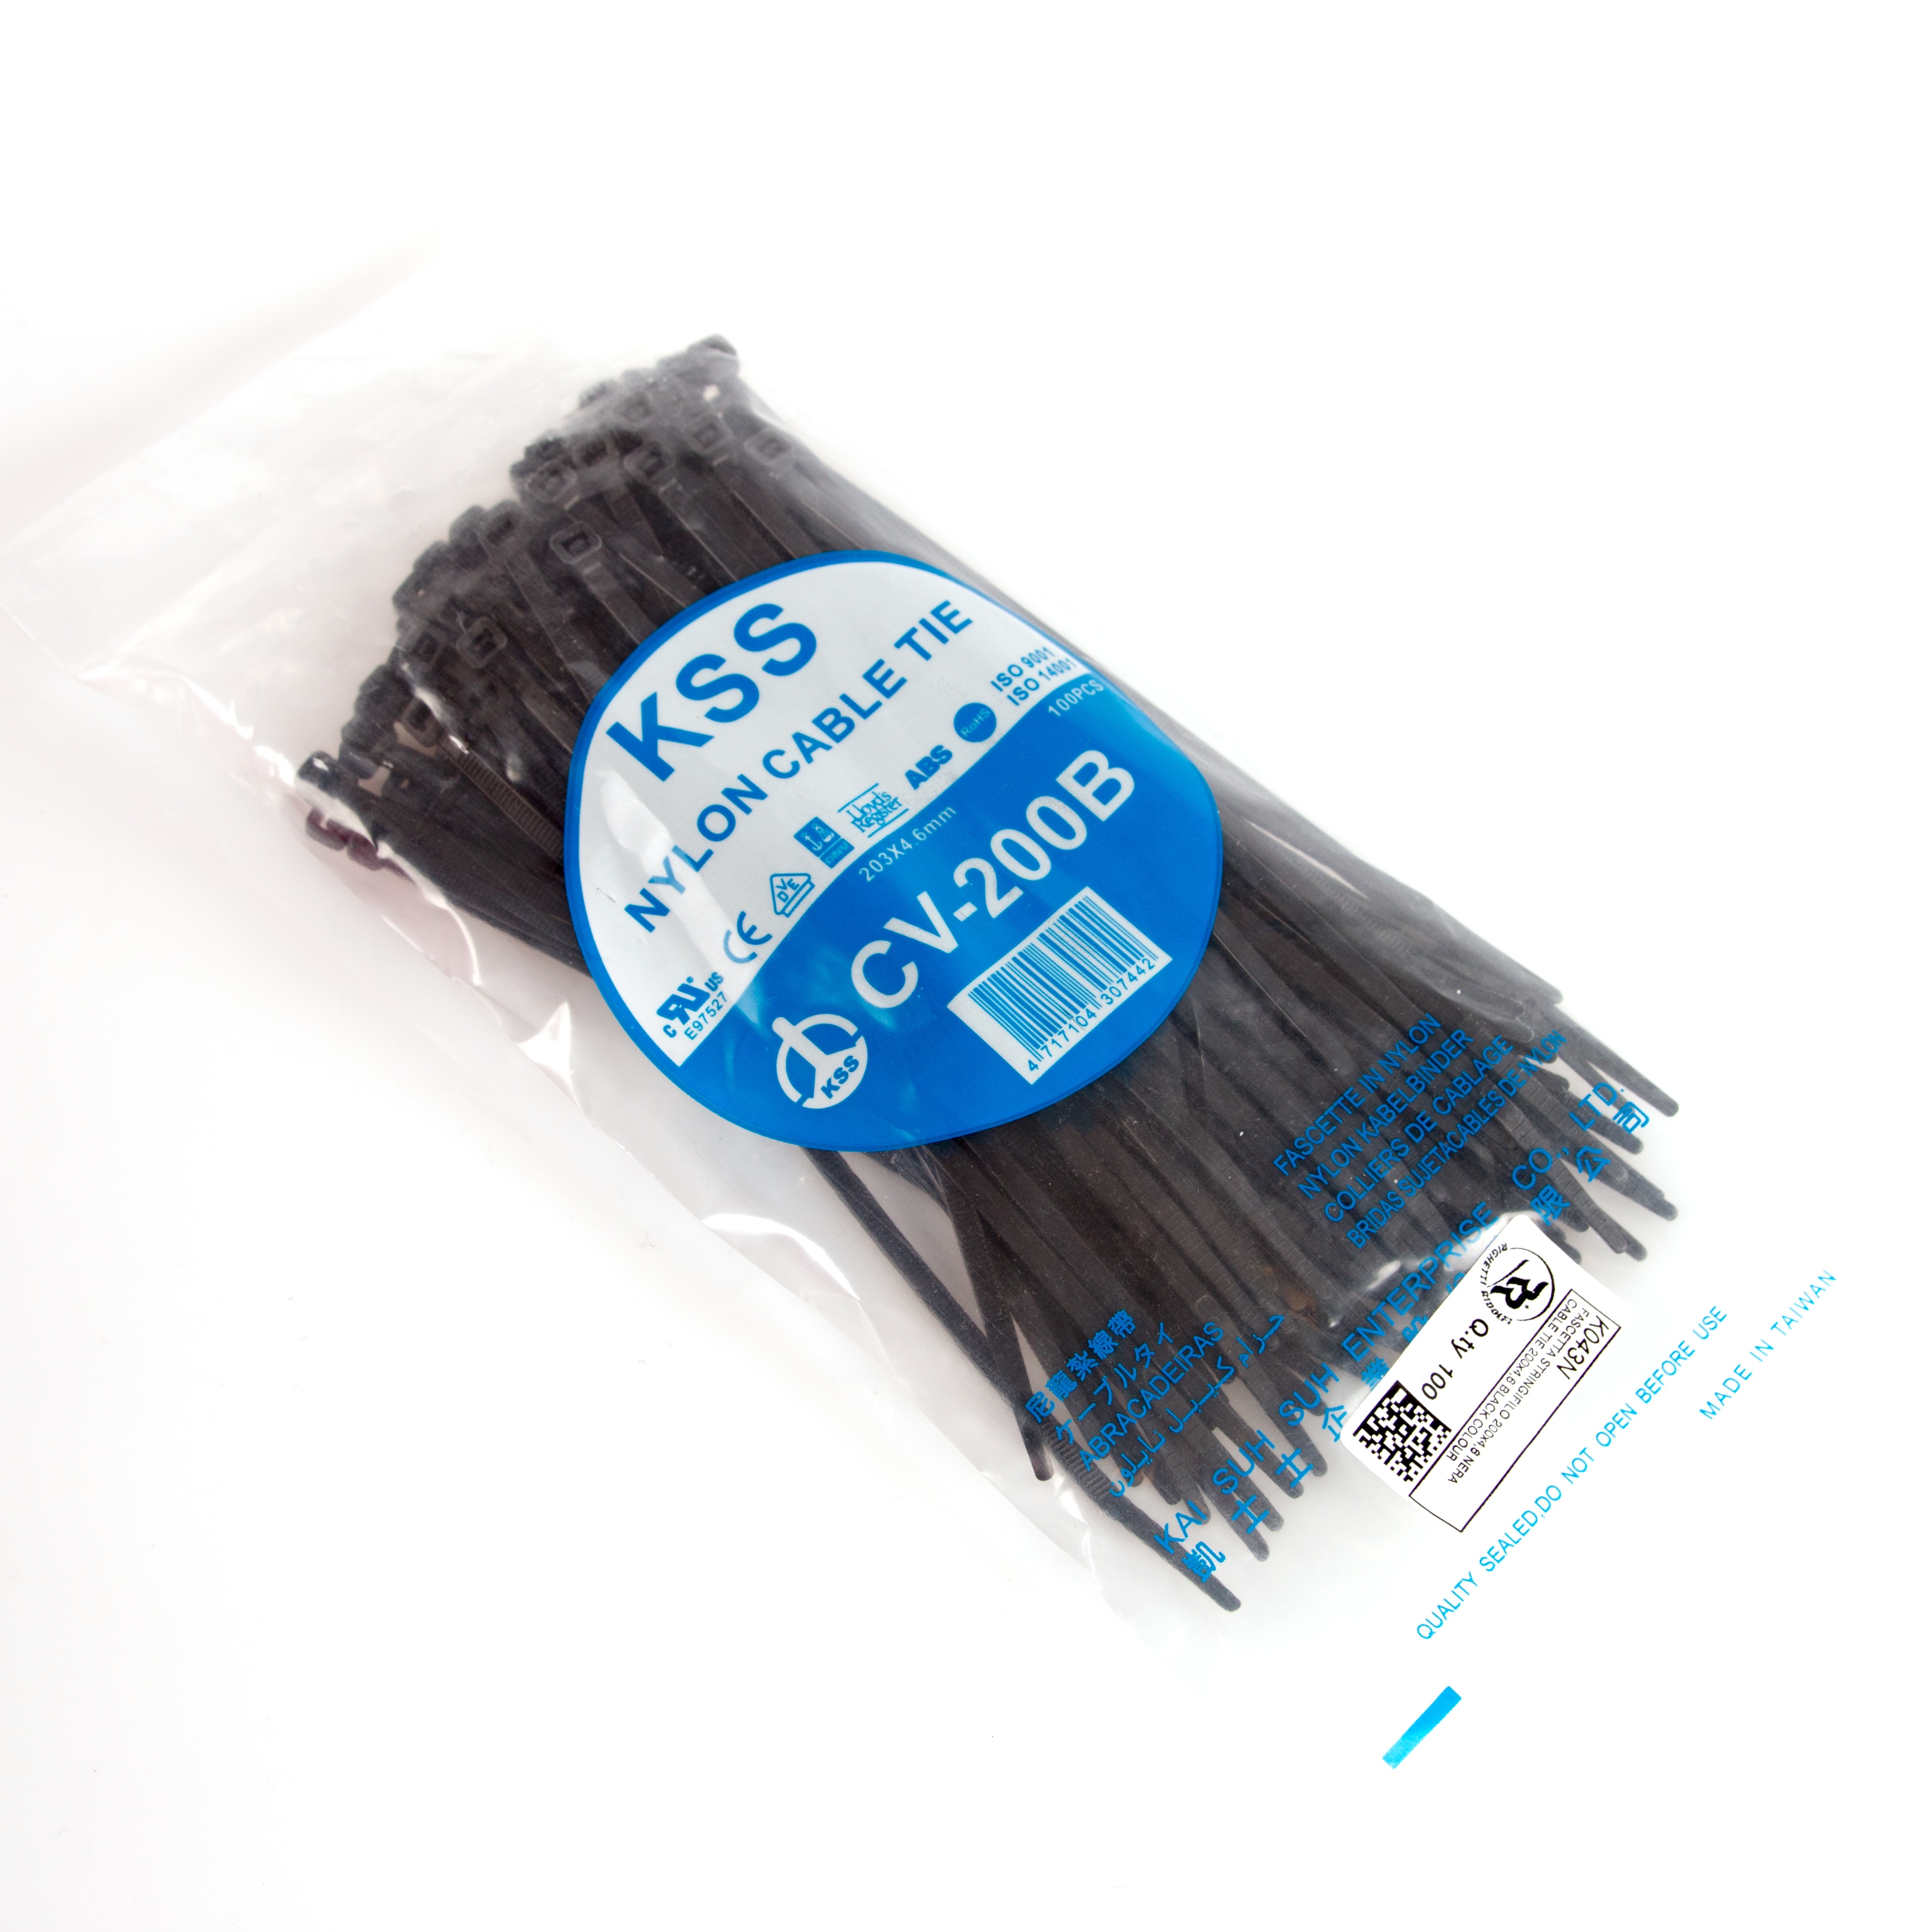 Cable Ties 200x4,8 100 pc Black